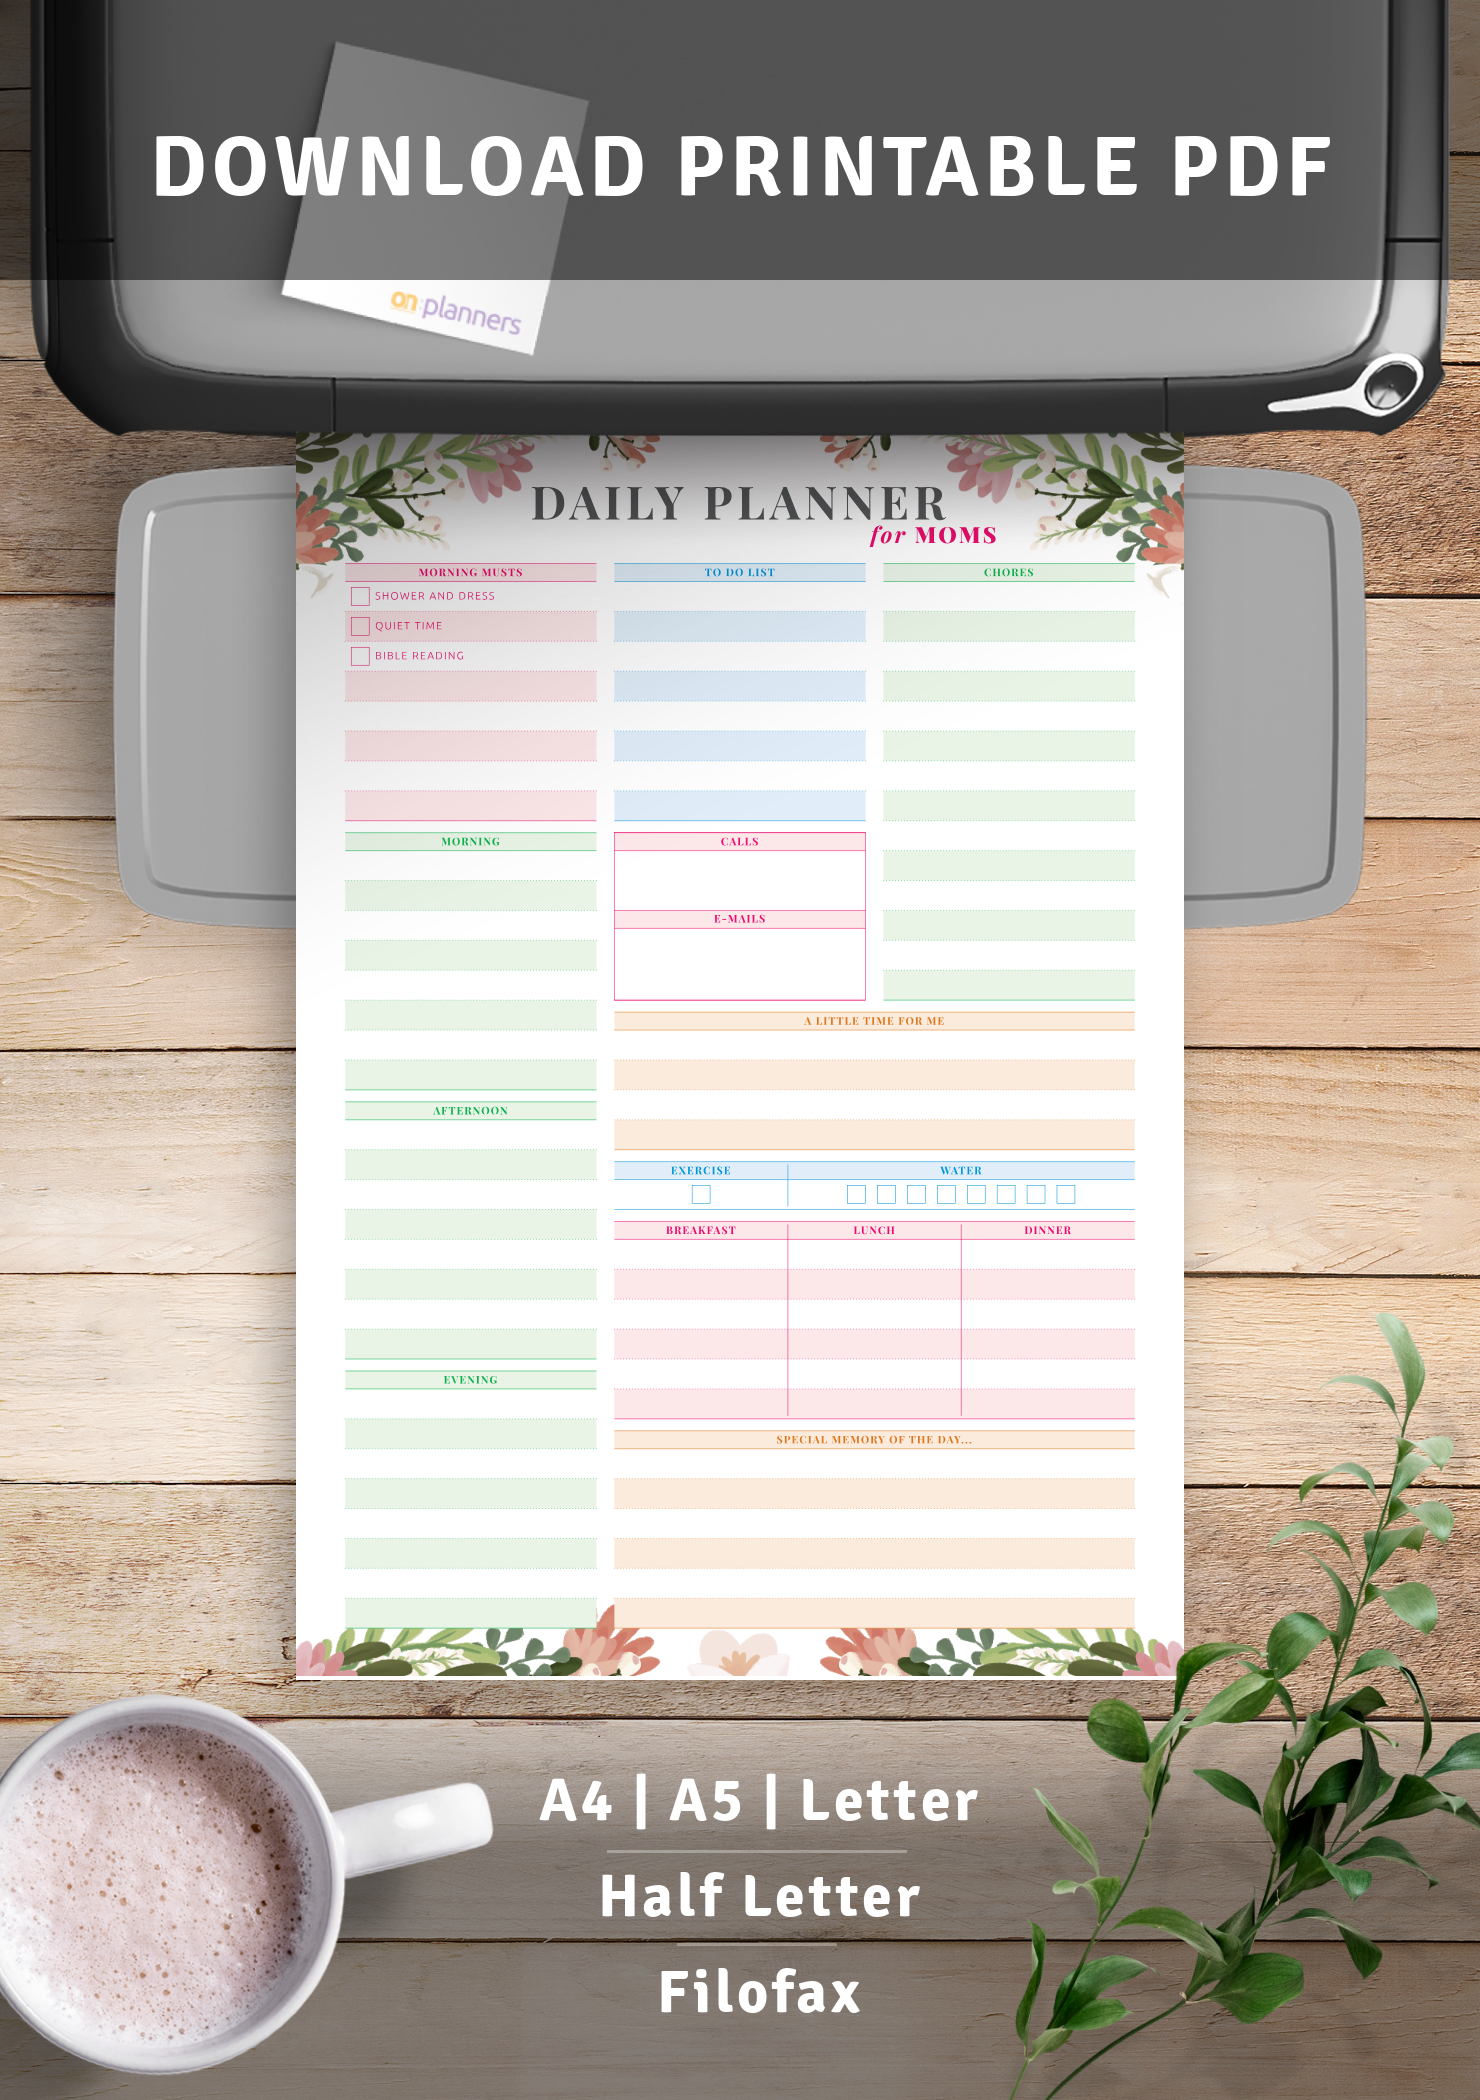 Download Printable Colored Daily Planner For Moms PDF